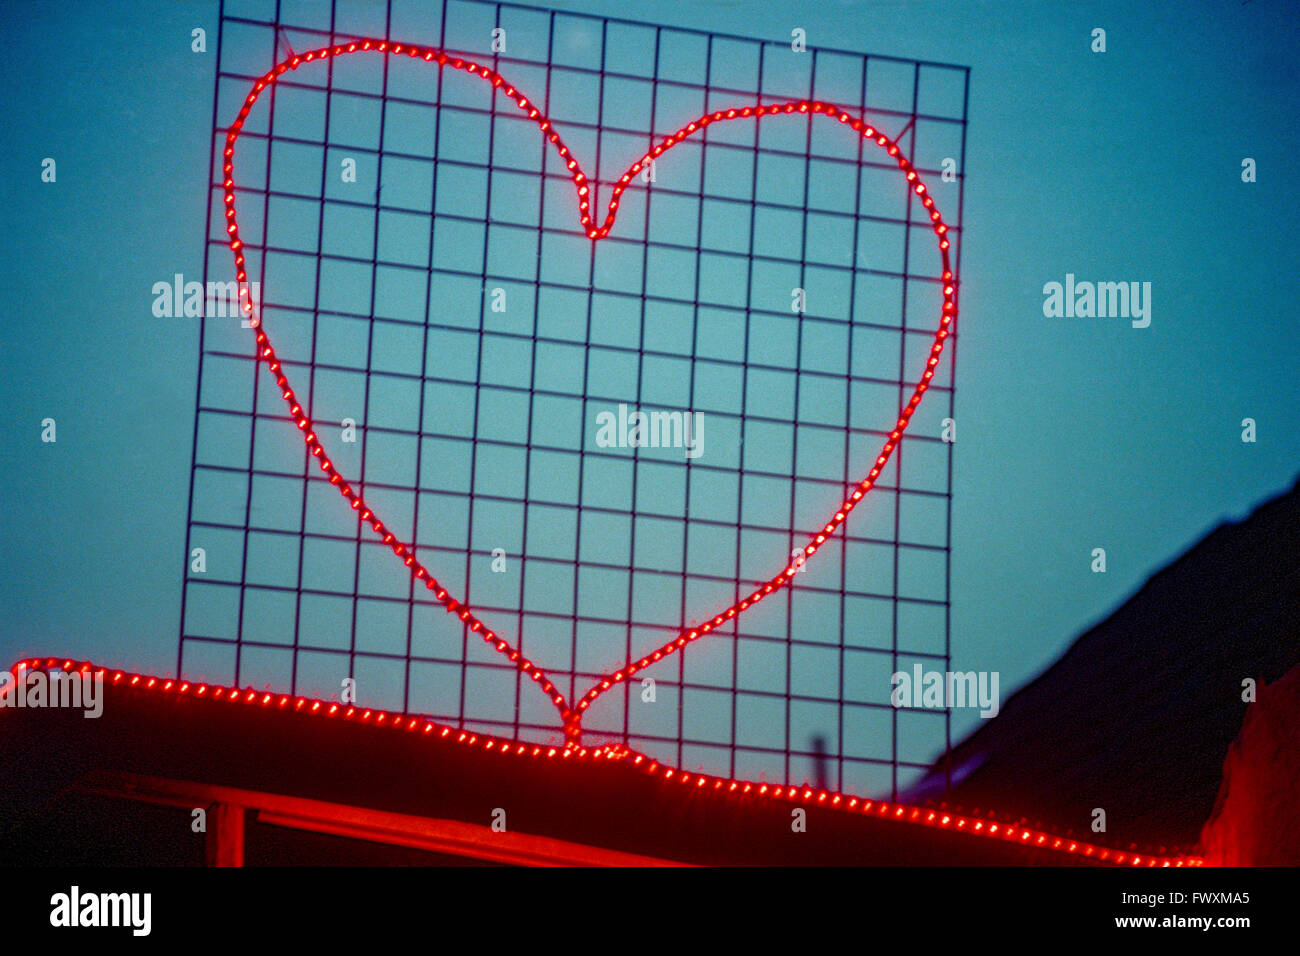 Light shaped to love heart-shaped symbol on the roof of the house Stock Photo